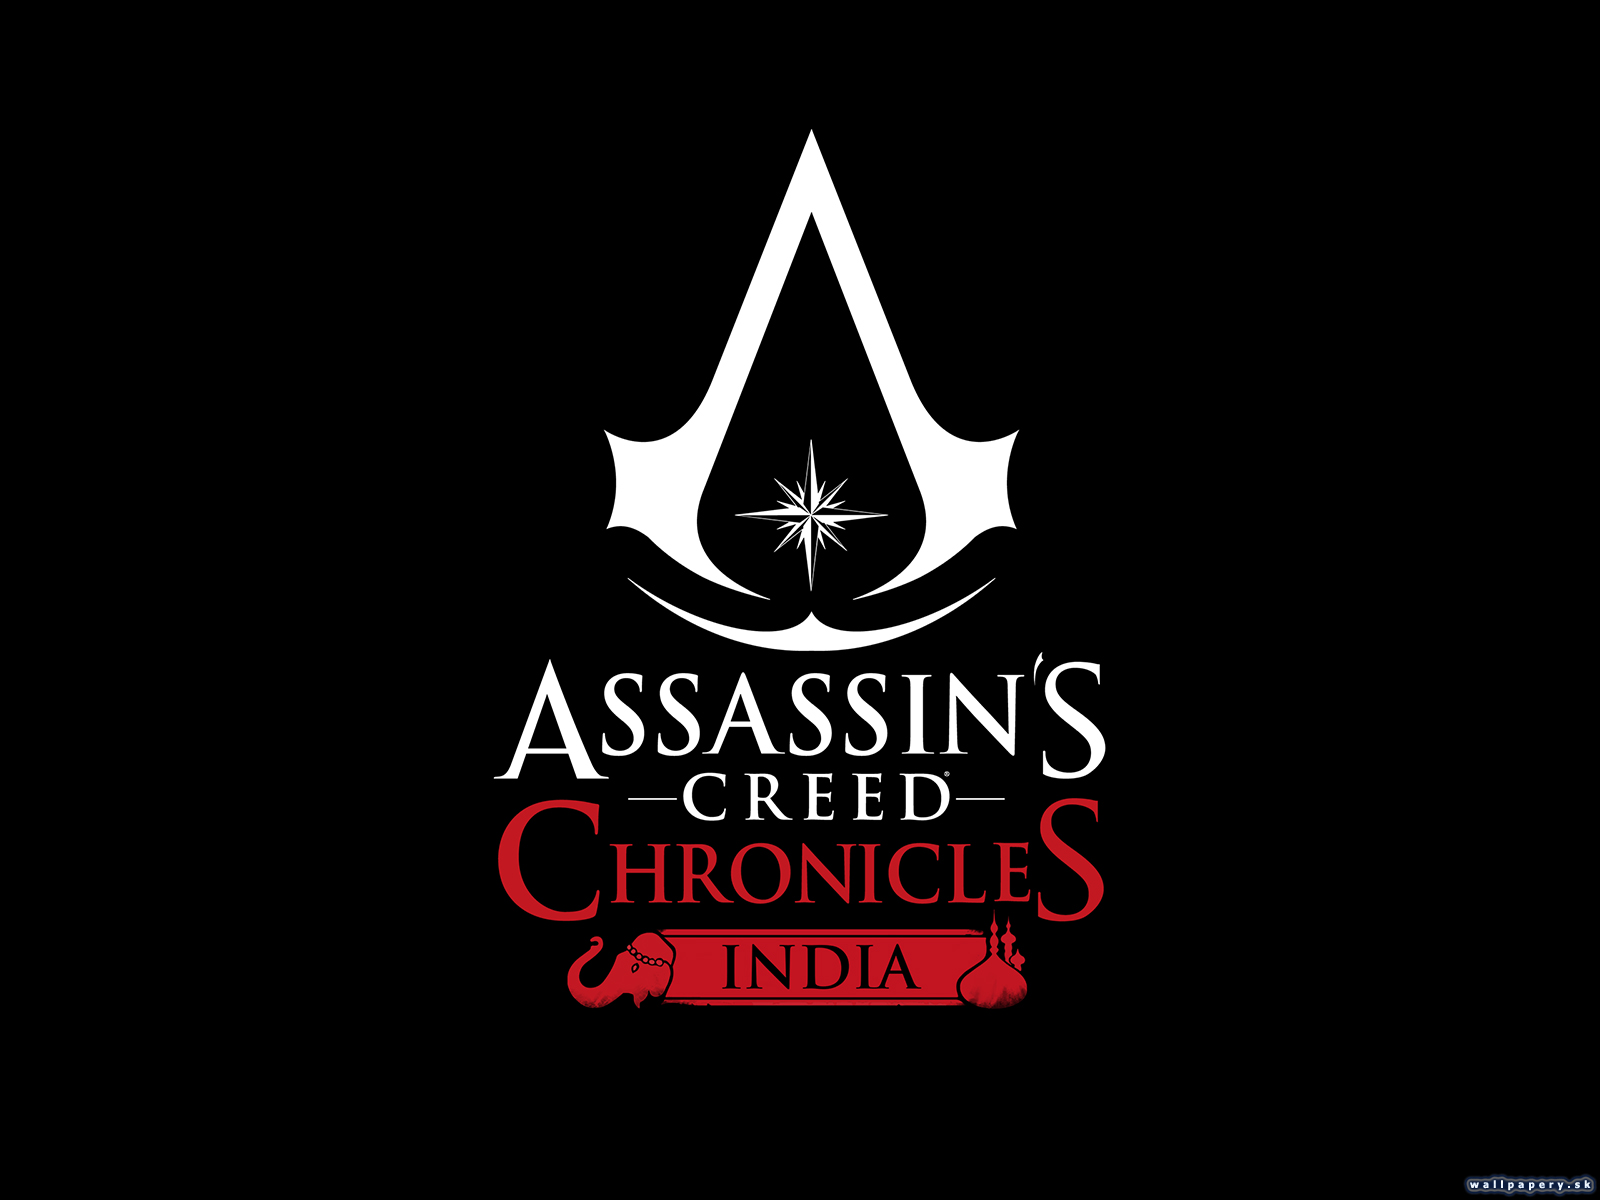 Assassin's Creed Chronicles: India - wallpaper 2